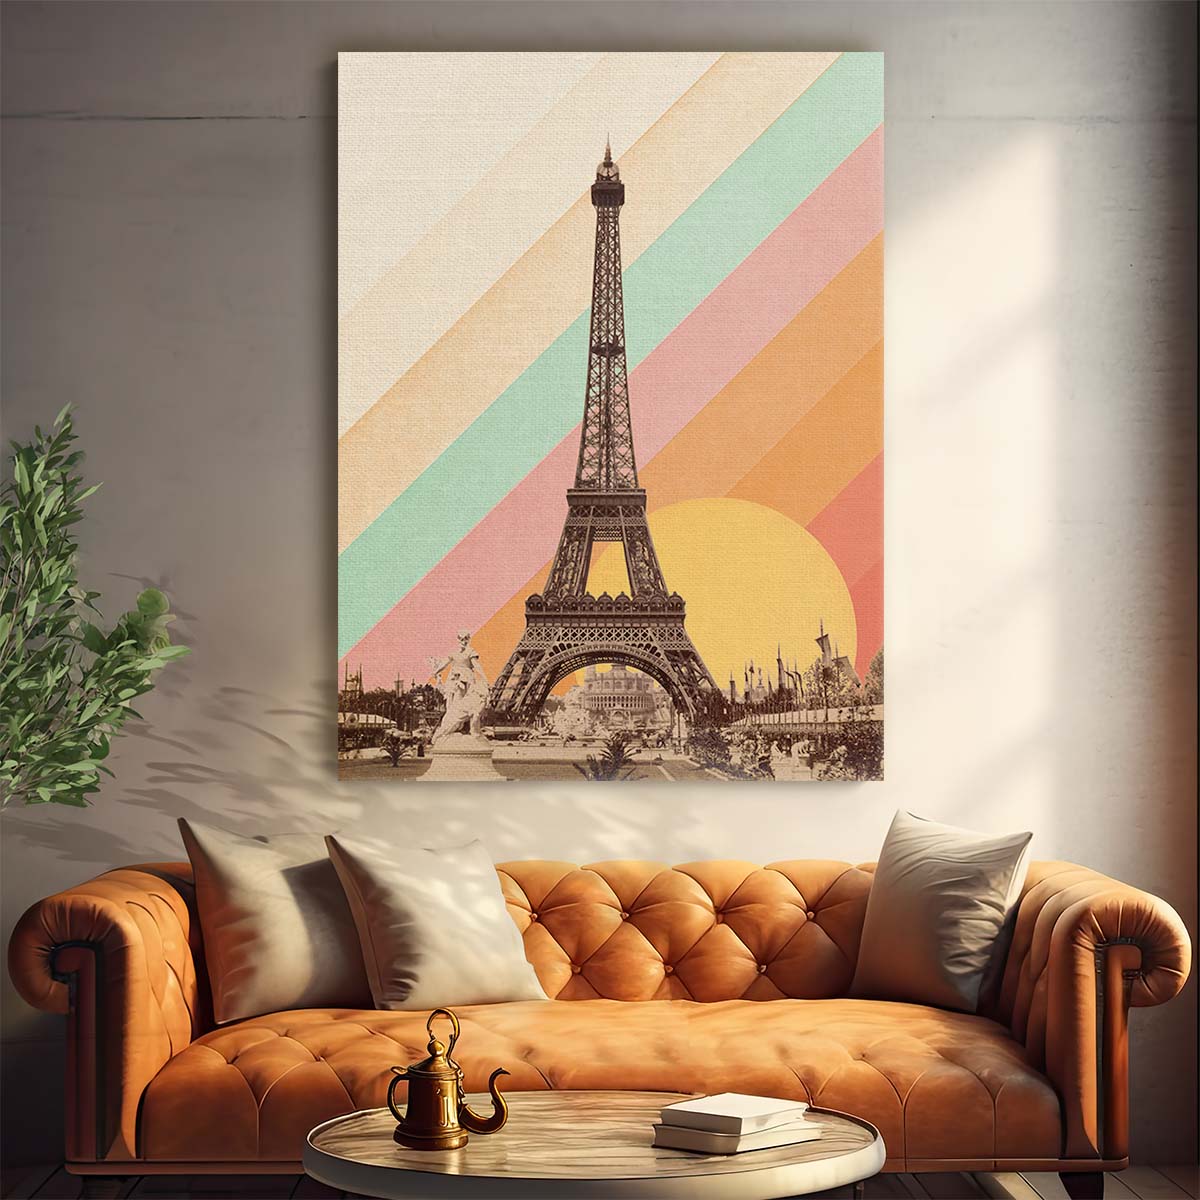 Parisian Eiffel Tower Illustration with Rainbow Colors by Florent Bodart by Luxuriance Designs, made in USA